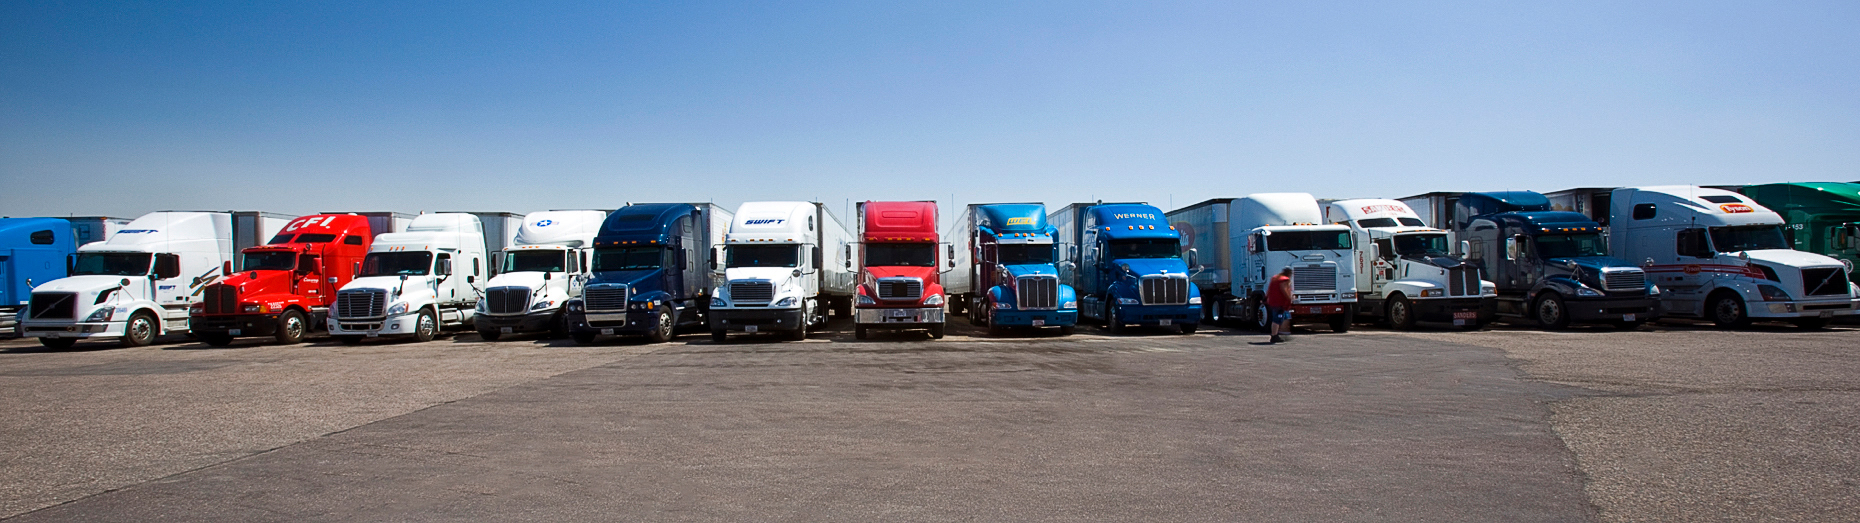 Over-the-road tractor trailer rigs parked at a Travel America truck stop, Interstate 70, Limon, Colorado, USA